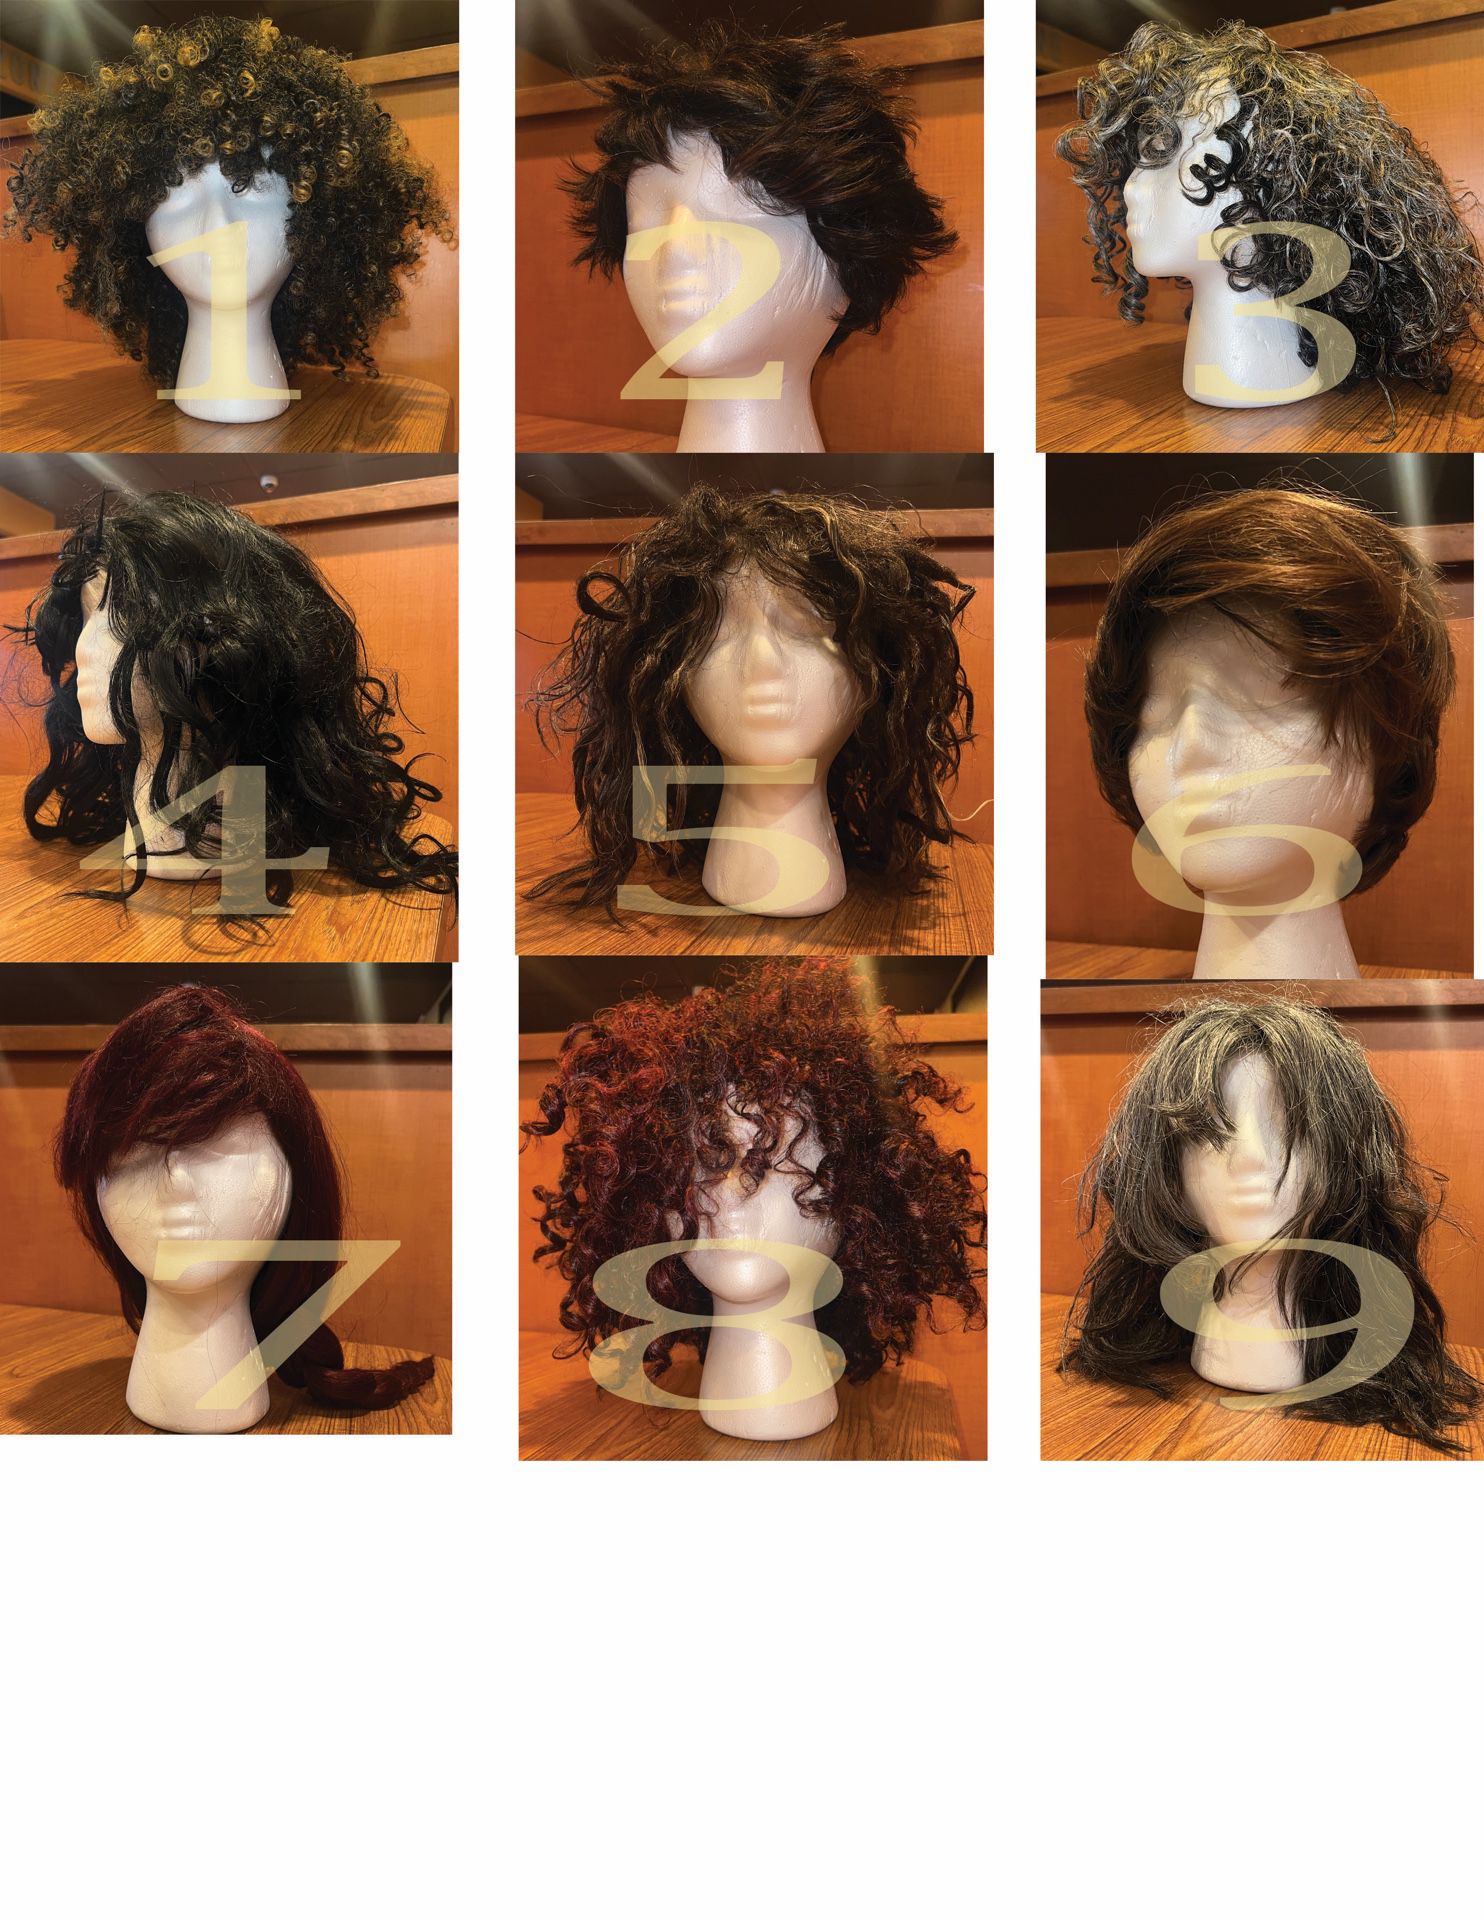 Over 30 High Quality Wigs For $50 Each 